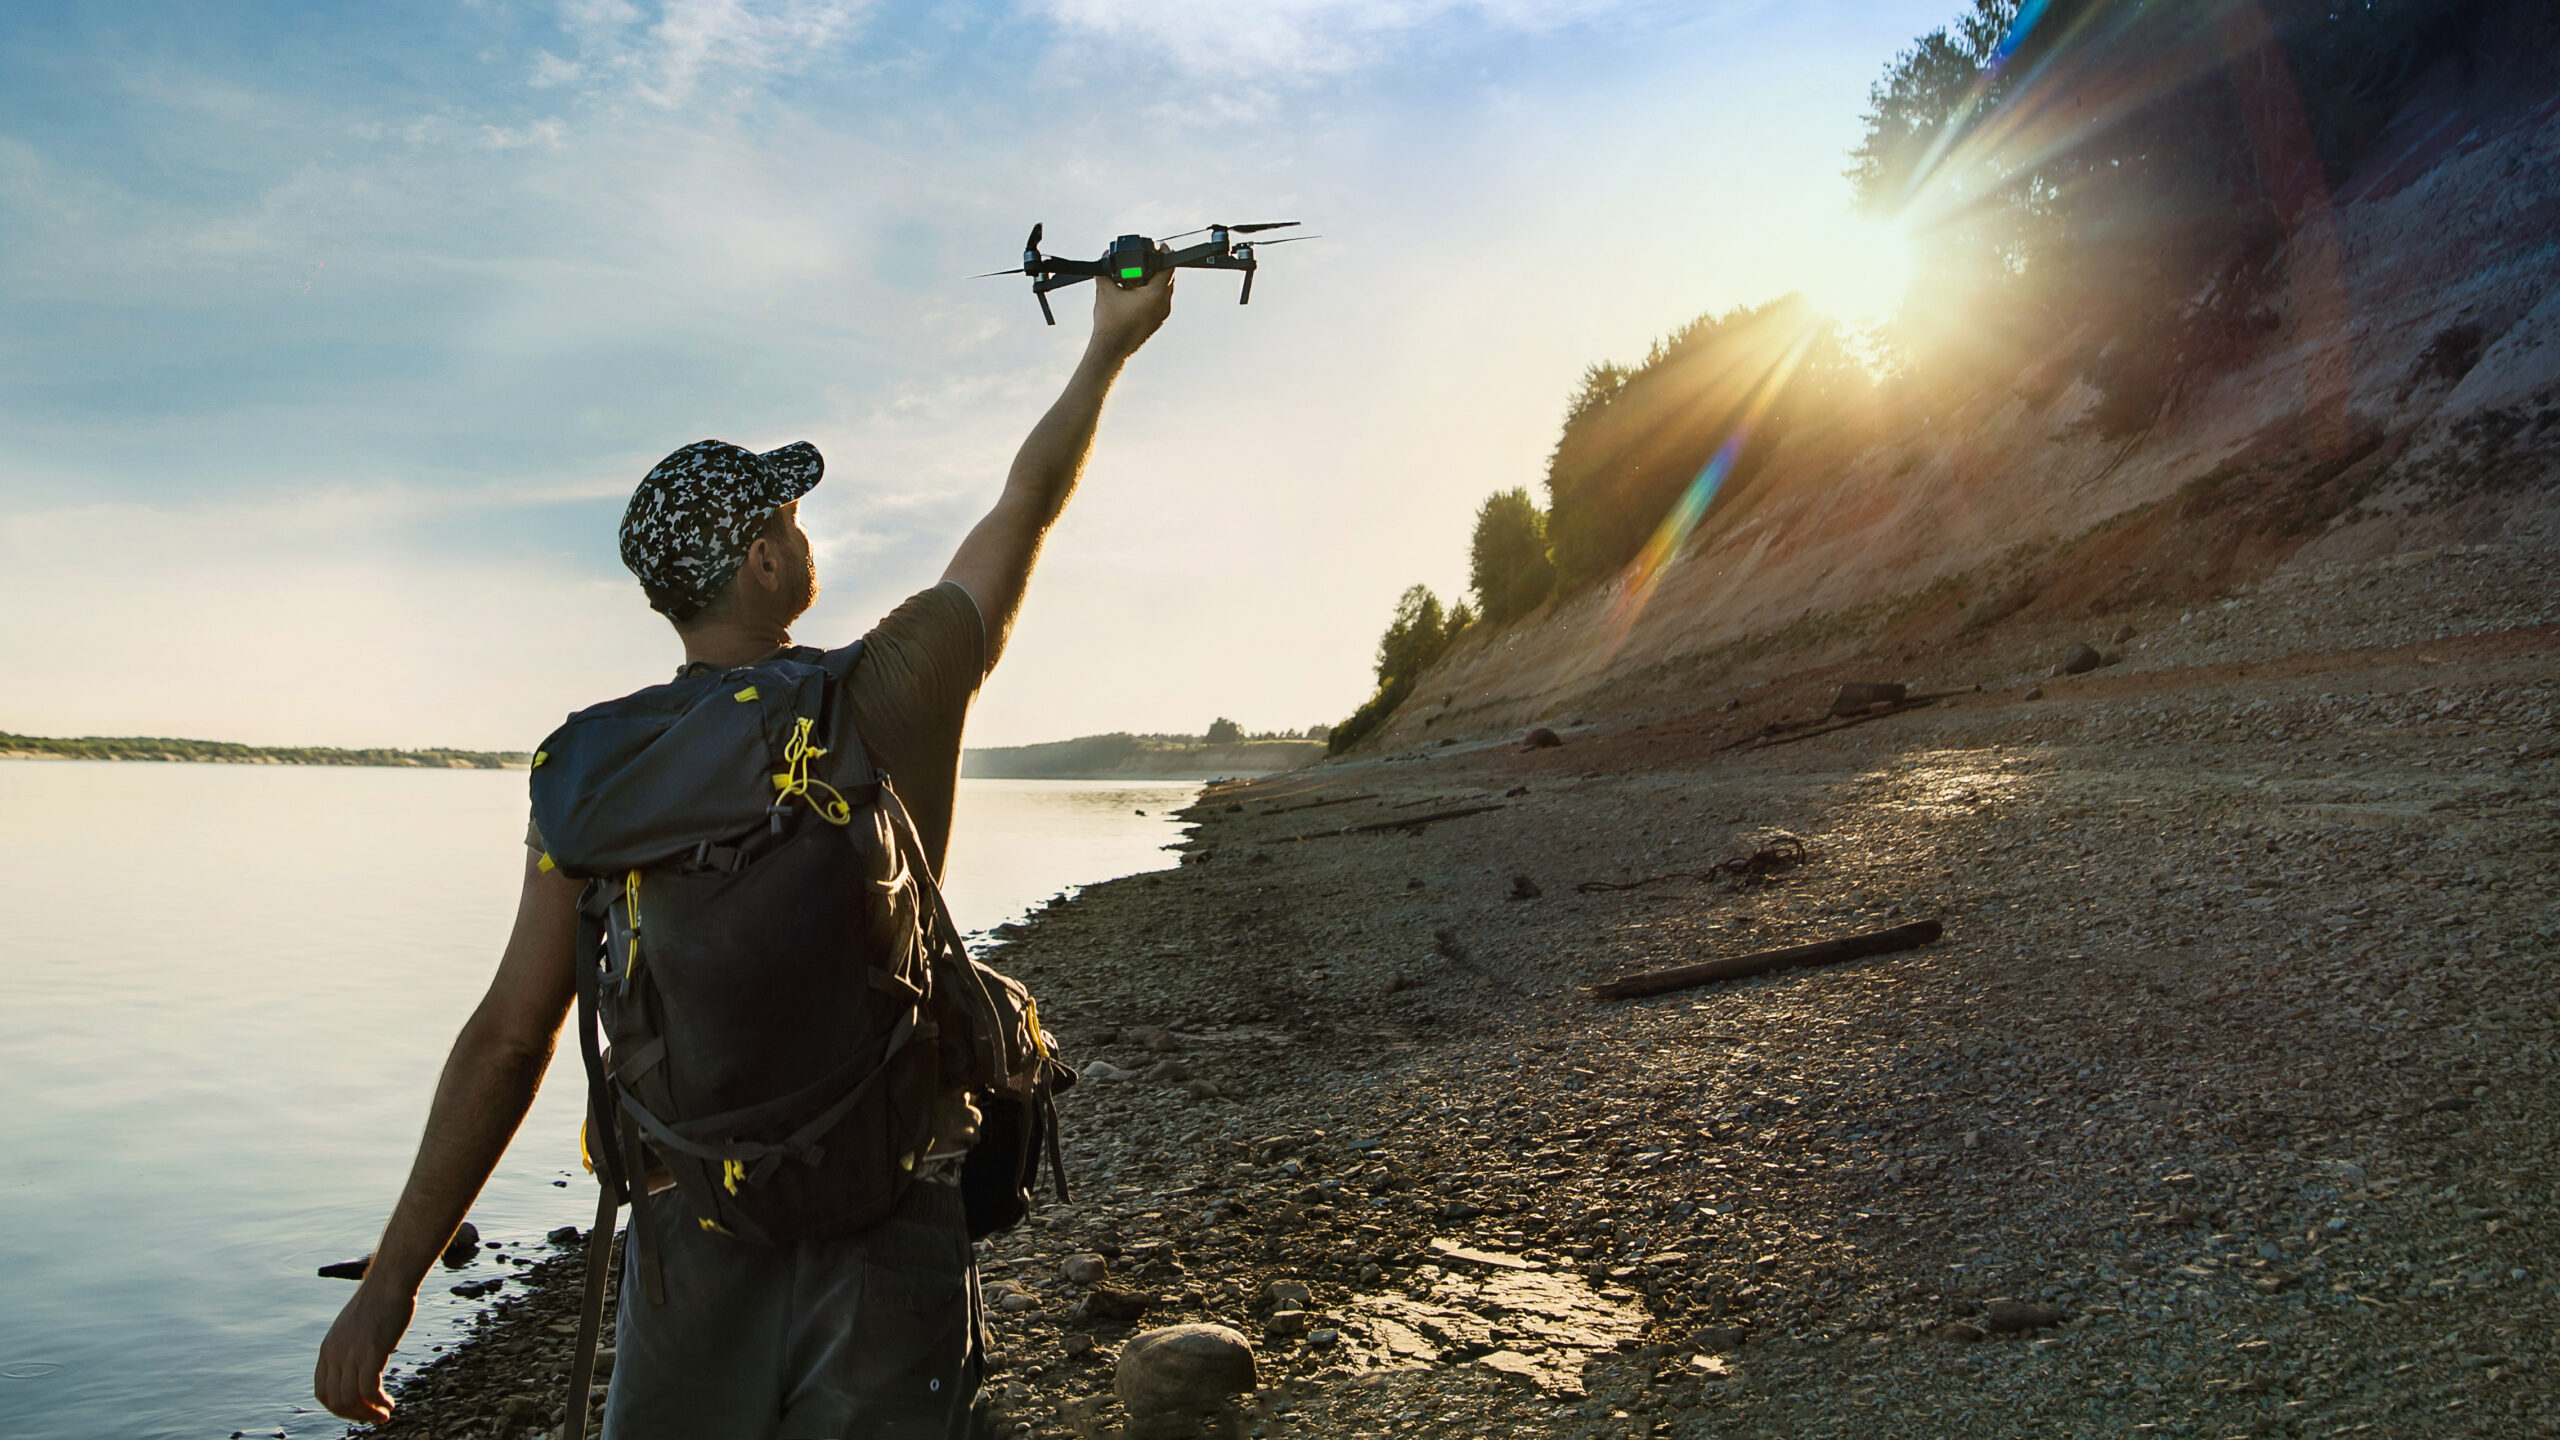 Choosing the Best Drones for Photography